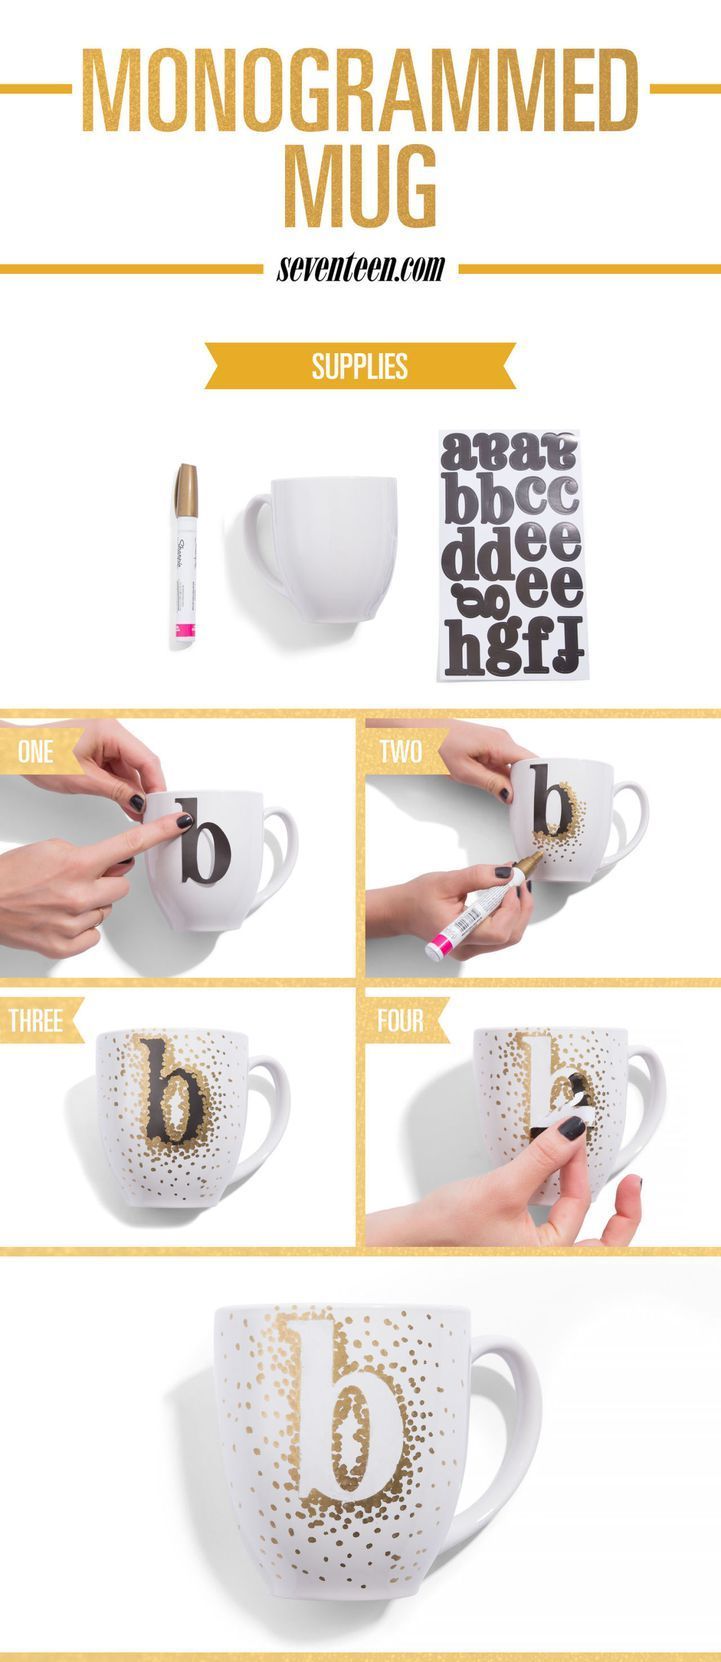 11 Ridiculously Awesome DIY Gifts for Your BFFs - 11 Ridiculously Awesome DIY Gifts for Your BFFs -   18 diy for friends ideas